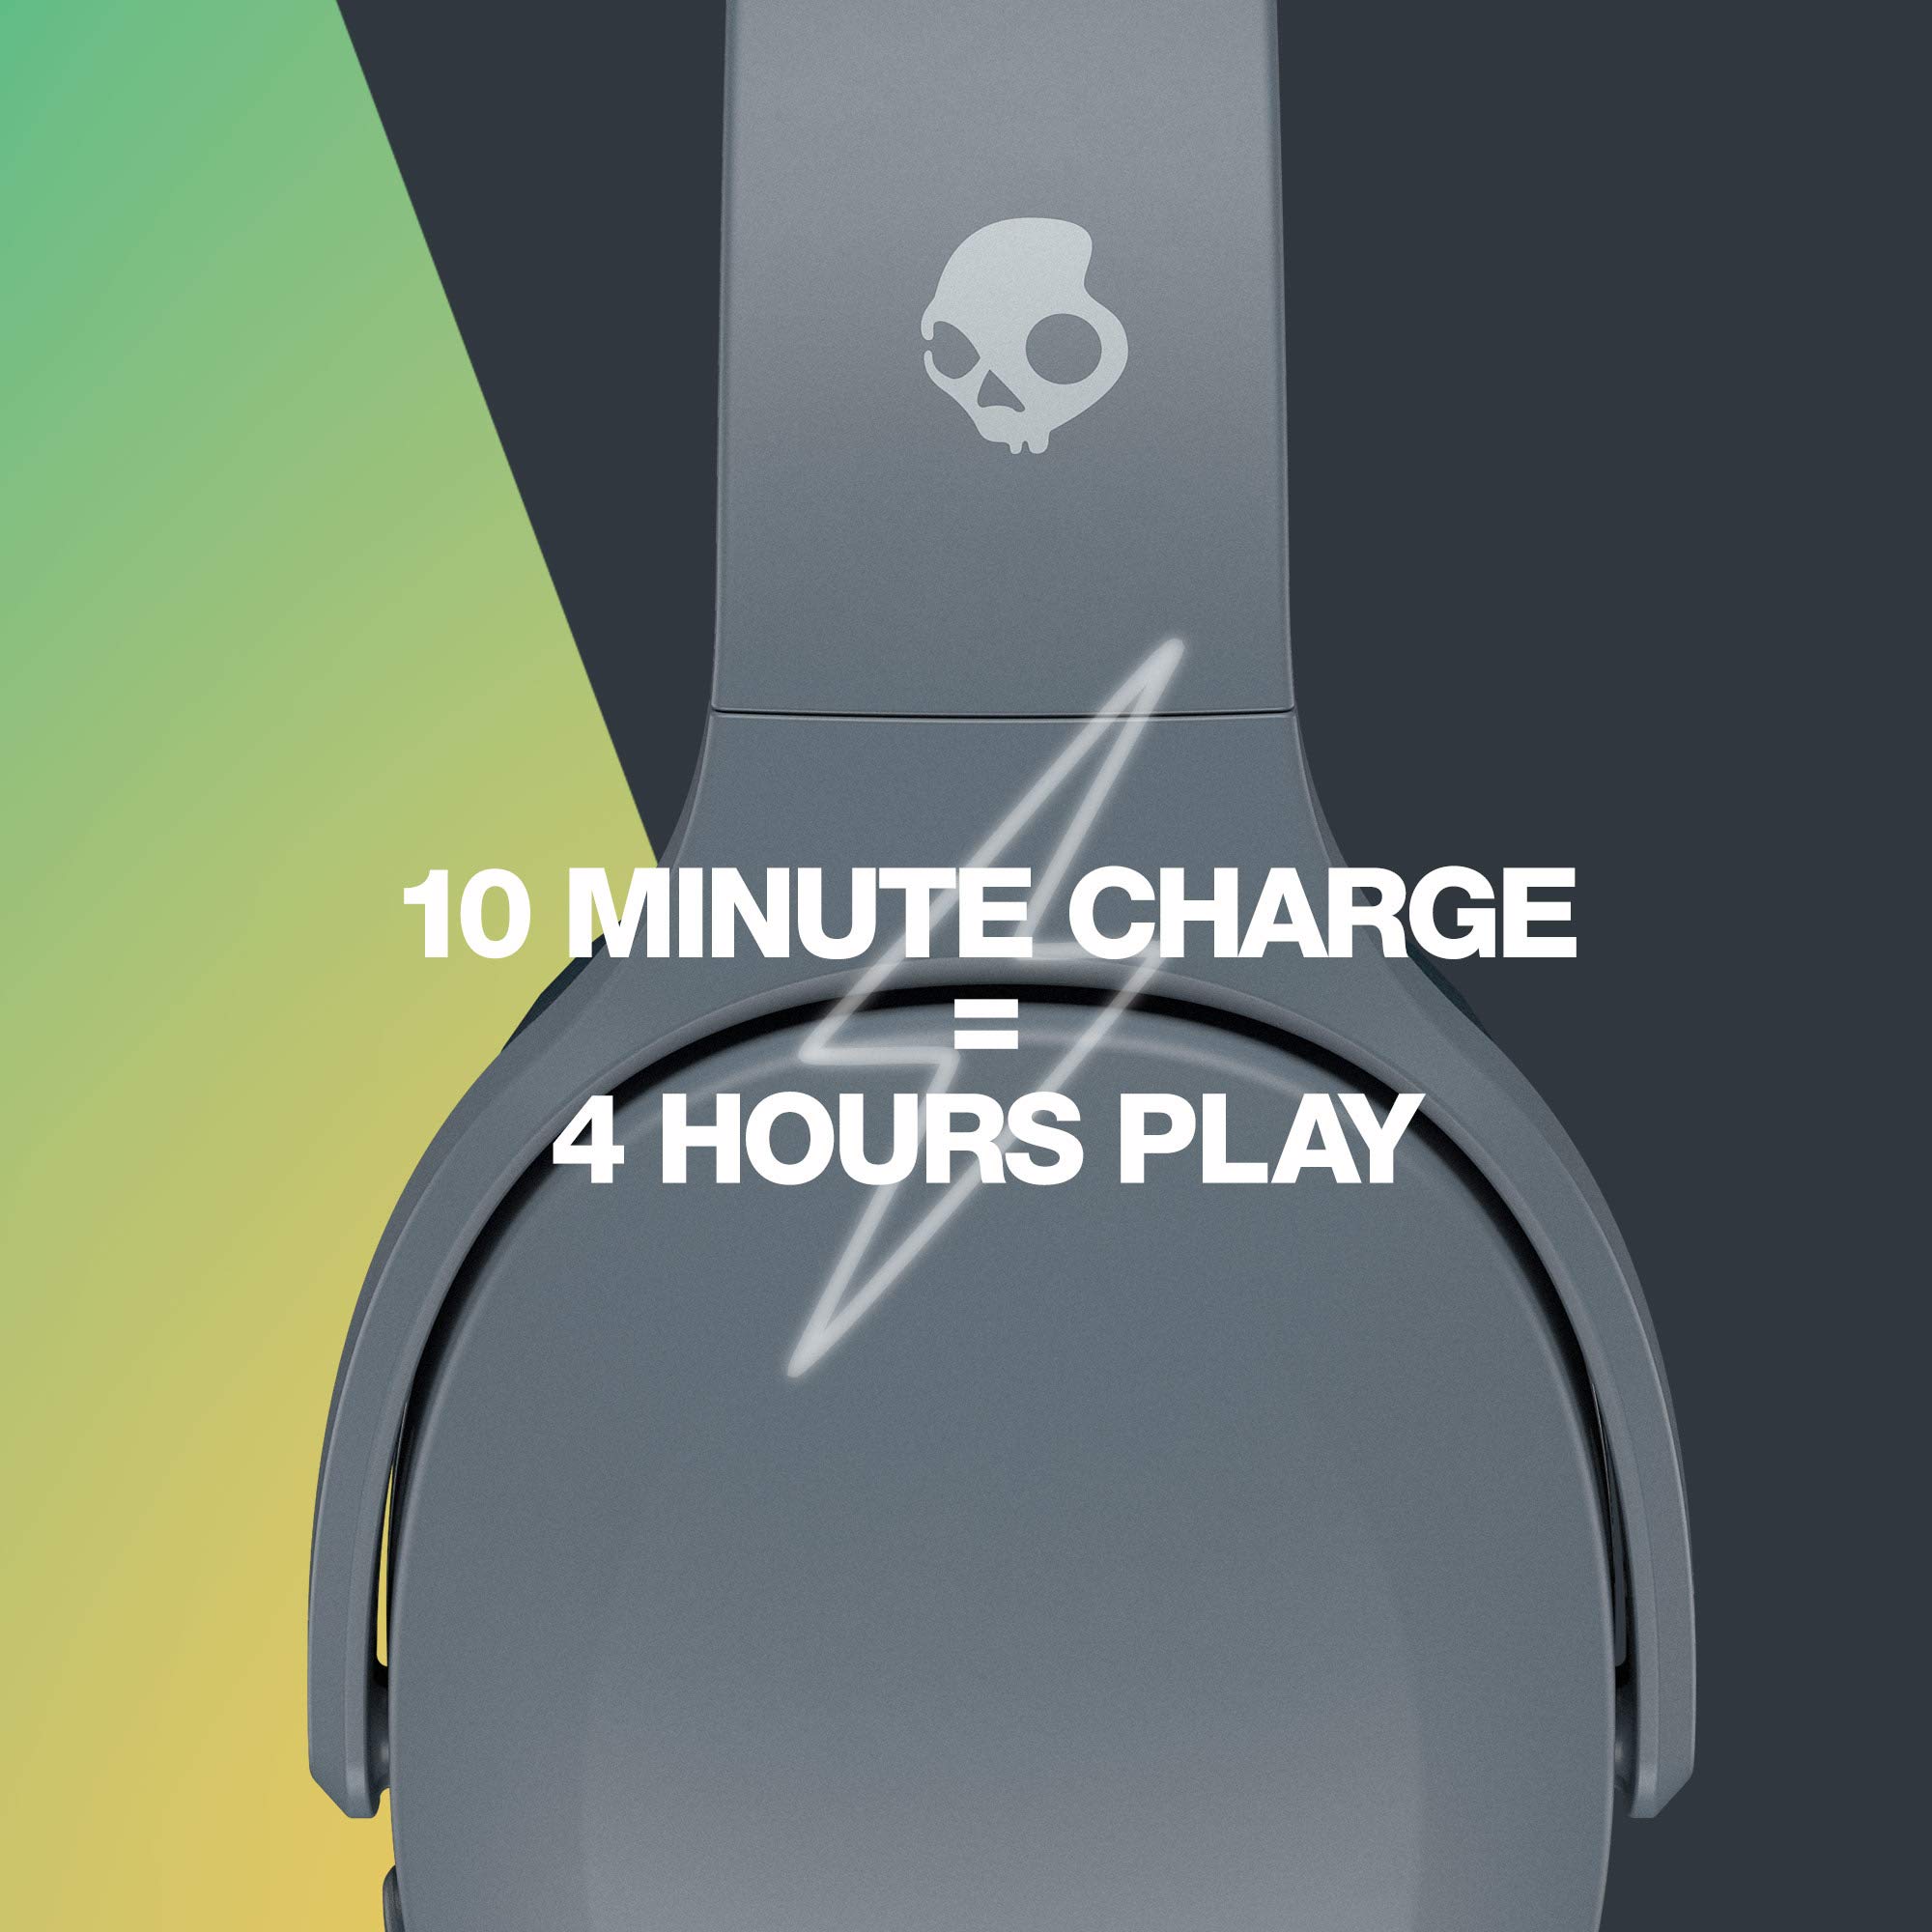 Skullcandy Crusher Evo Over-Ear Wireless Headphones - Grey (Discontinued by Manufacturer)